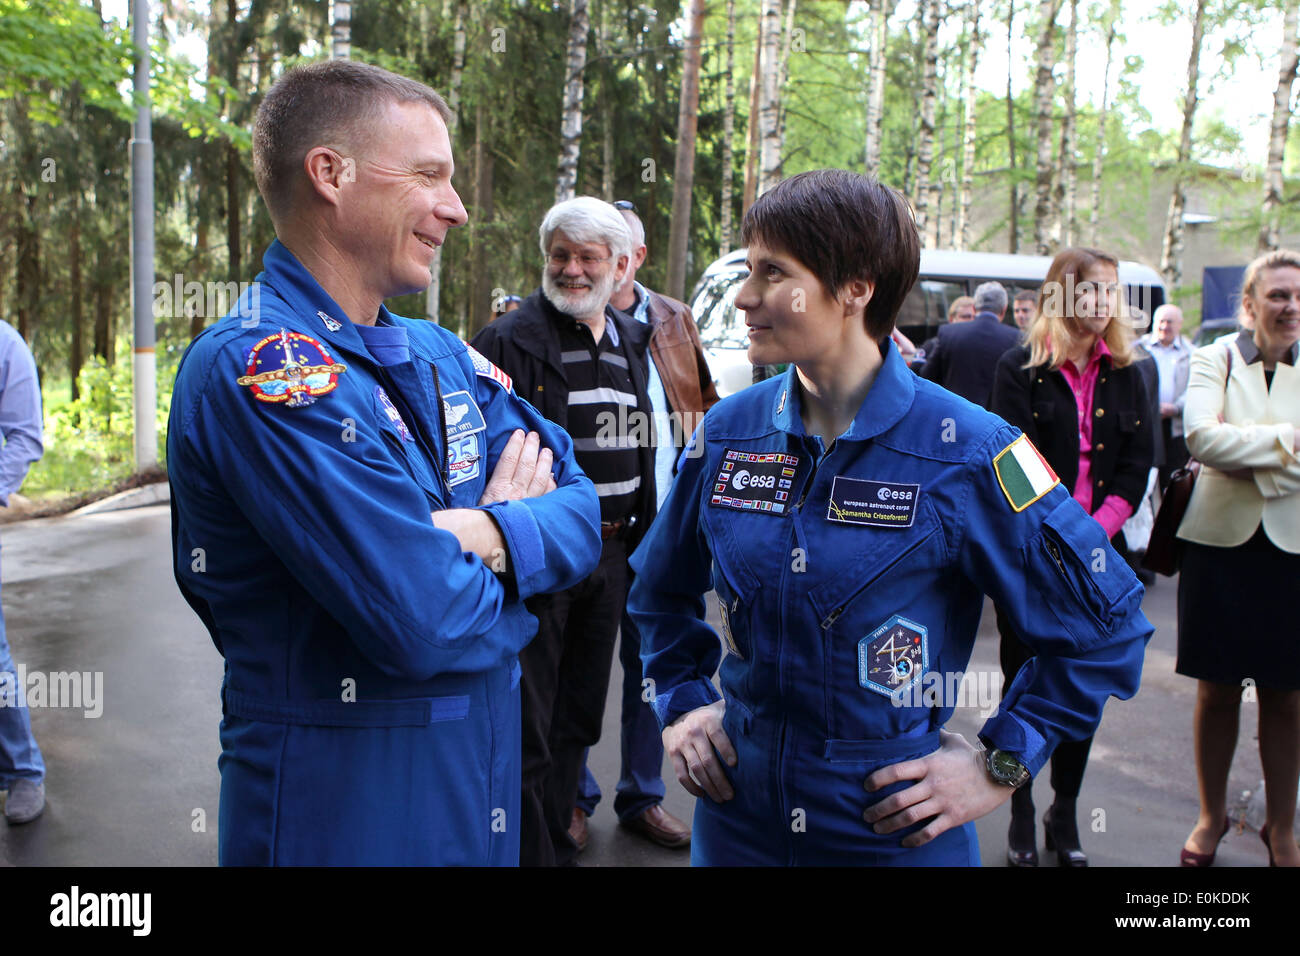 ISS Expedition 40/41 backup crew members Terry Virts of NASA, left, and Samantha Cristoforetti of the European Space Agency at the Gagarin Cosmonaut Training Center May 15, 2014 in Star City, Russia. Stock Photo